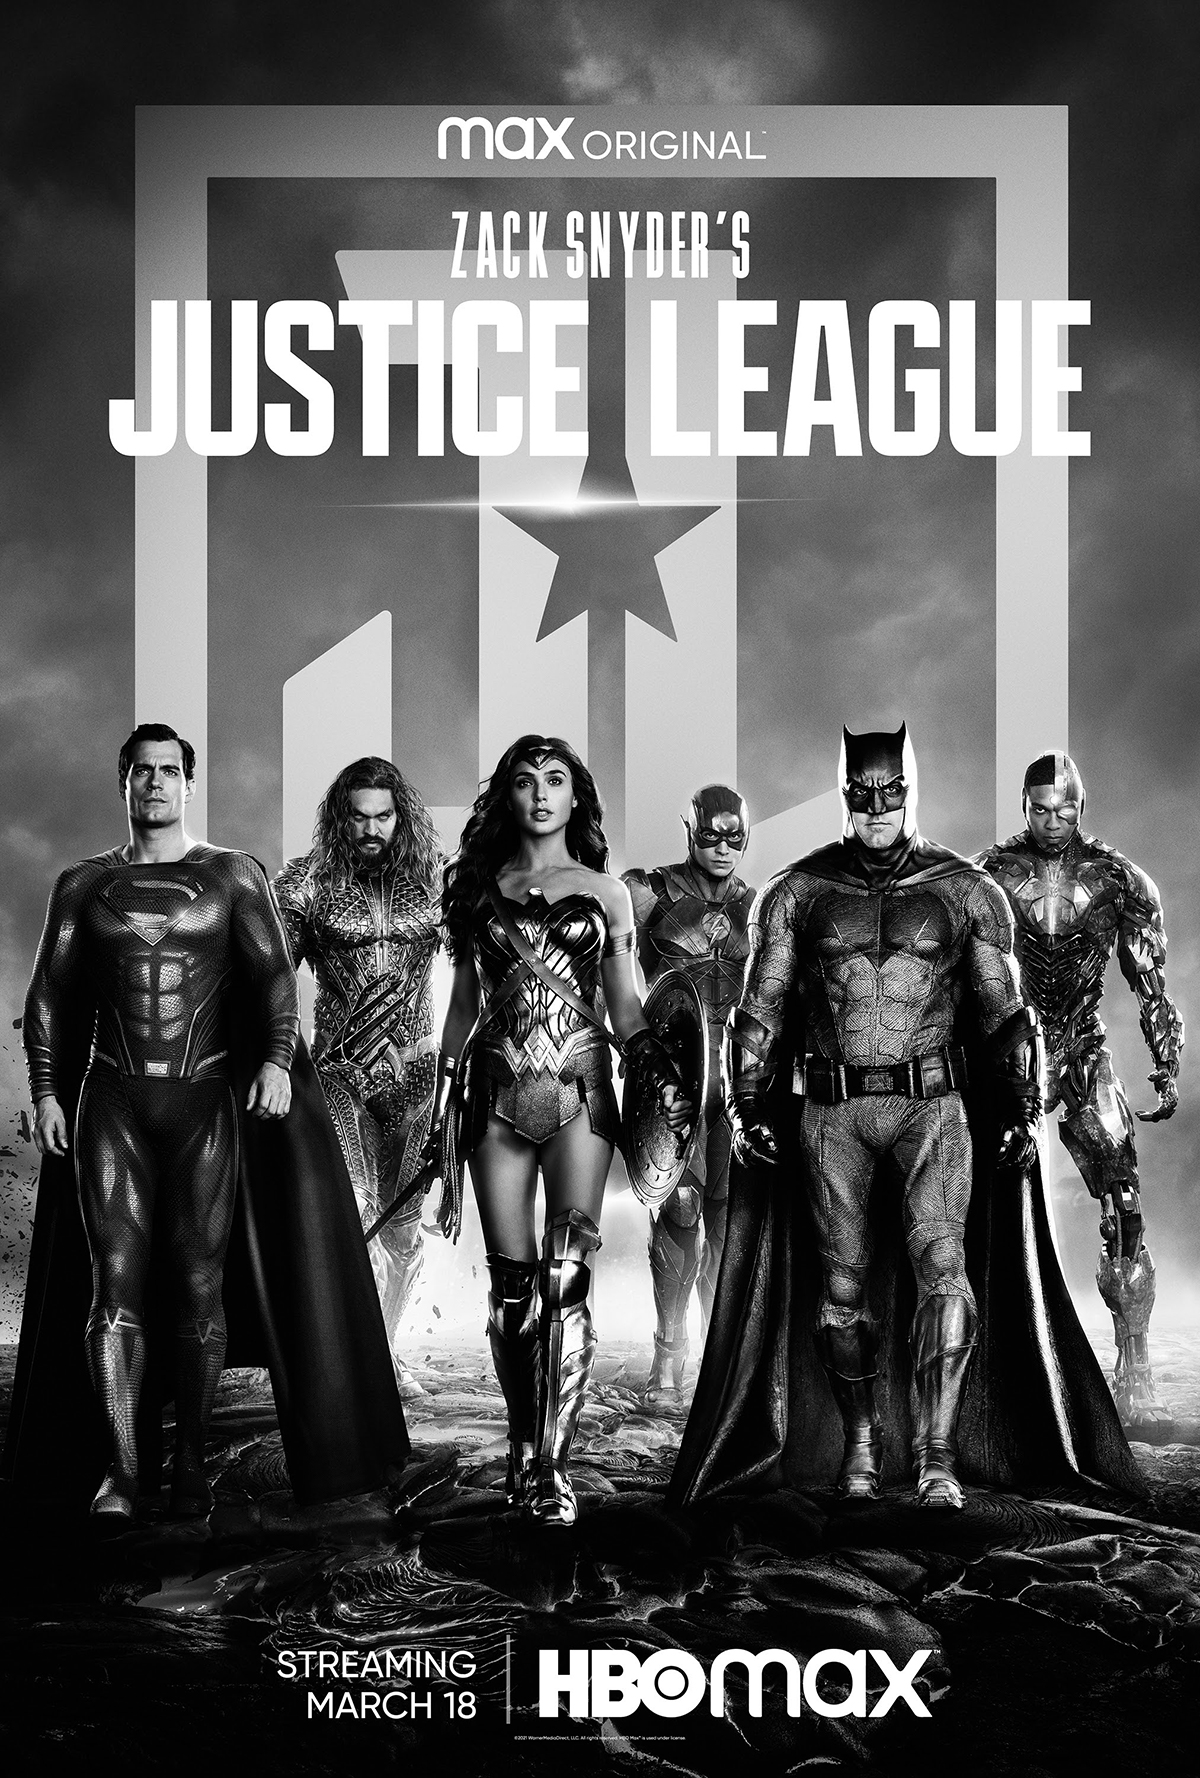 Will There Be a Zack Snyder's Justice League 2 Release Date & Is It Coming  Out?